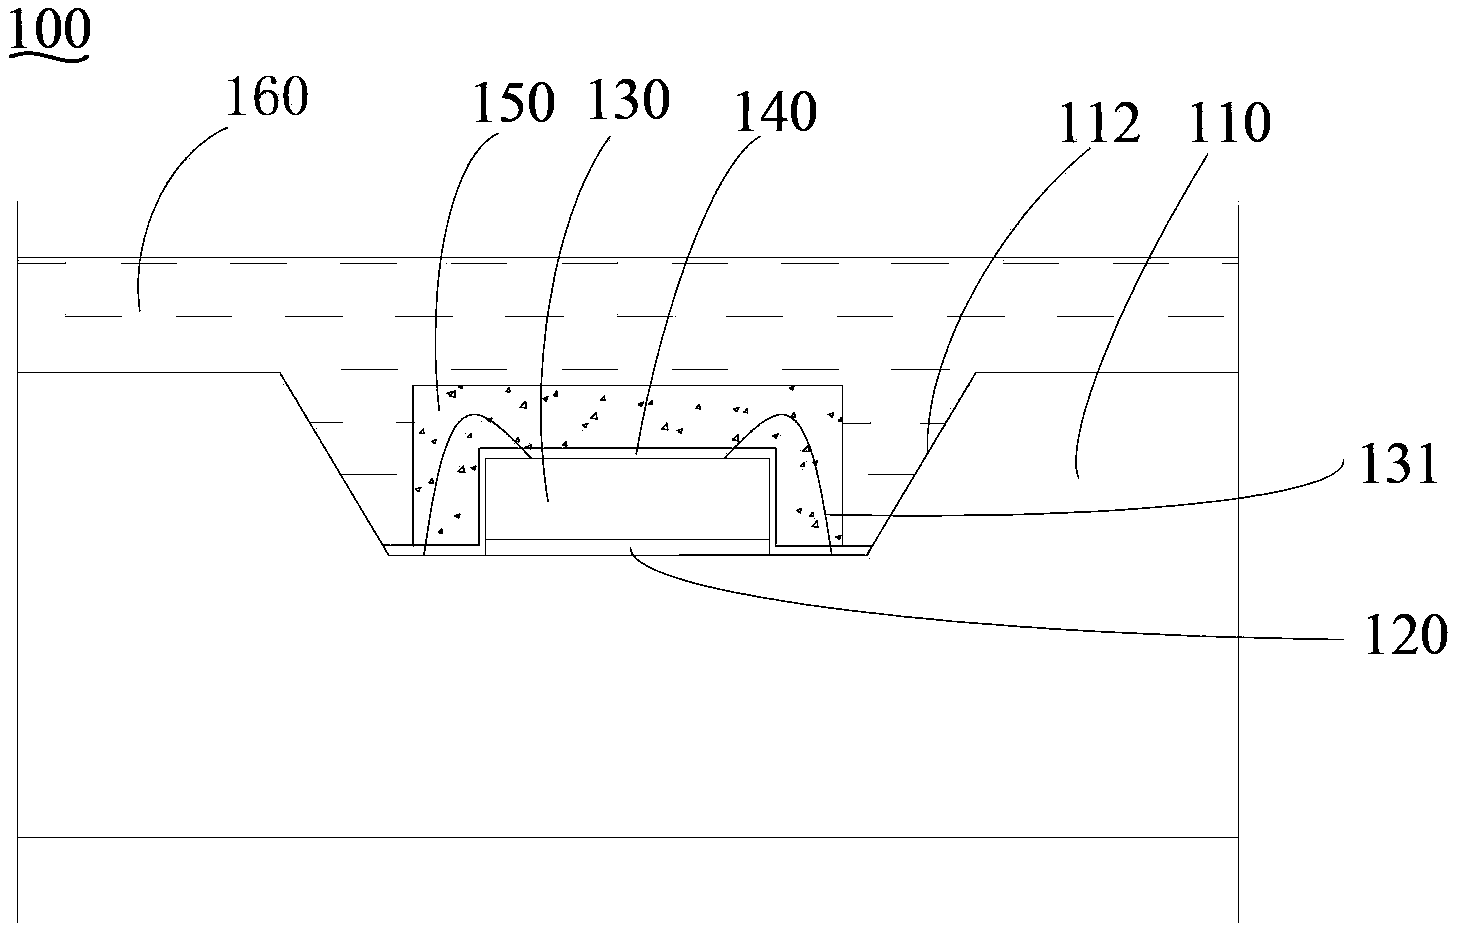 LED (Light Emitting Diode) packaging structure and process